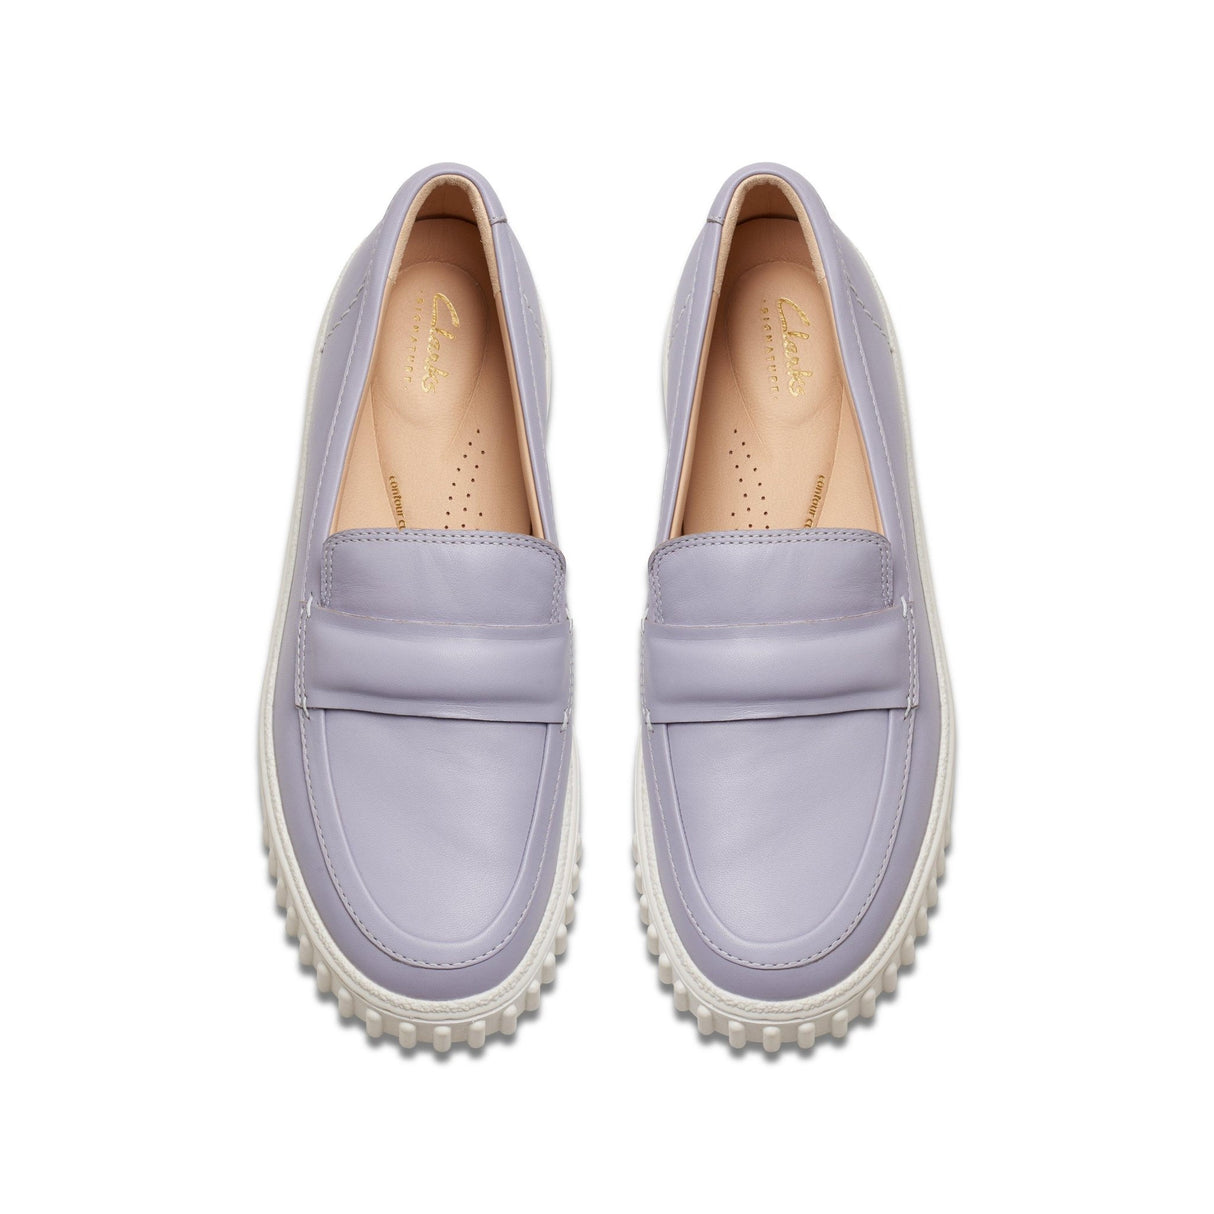 Clarks Women's Mayhill Cove Loafers - A&M Clothing & Shoes